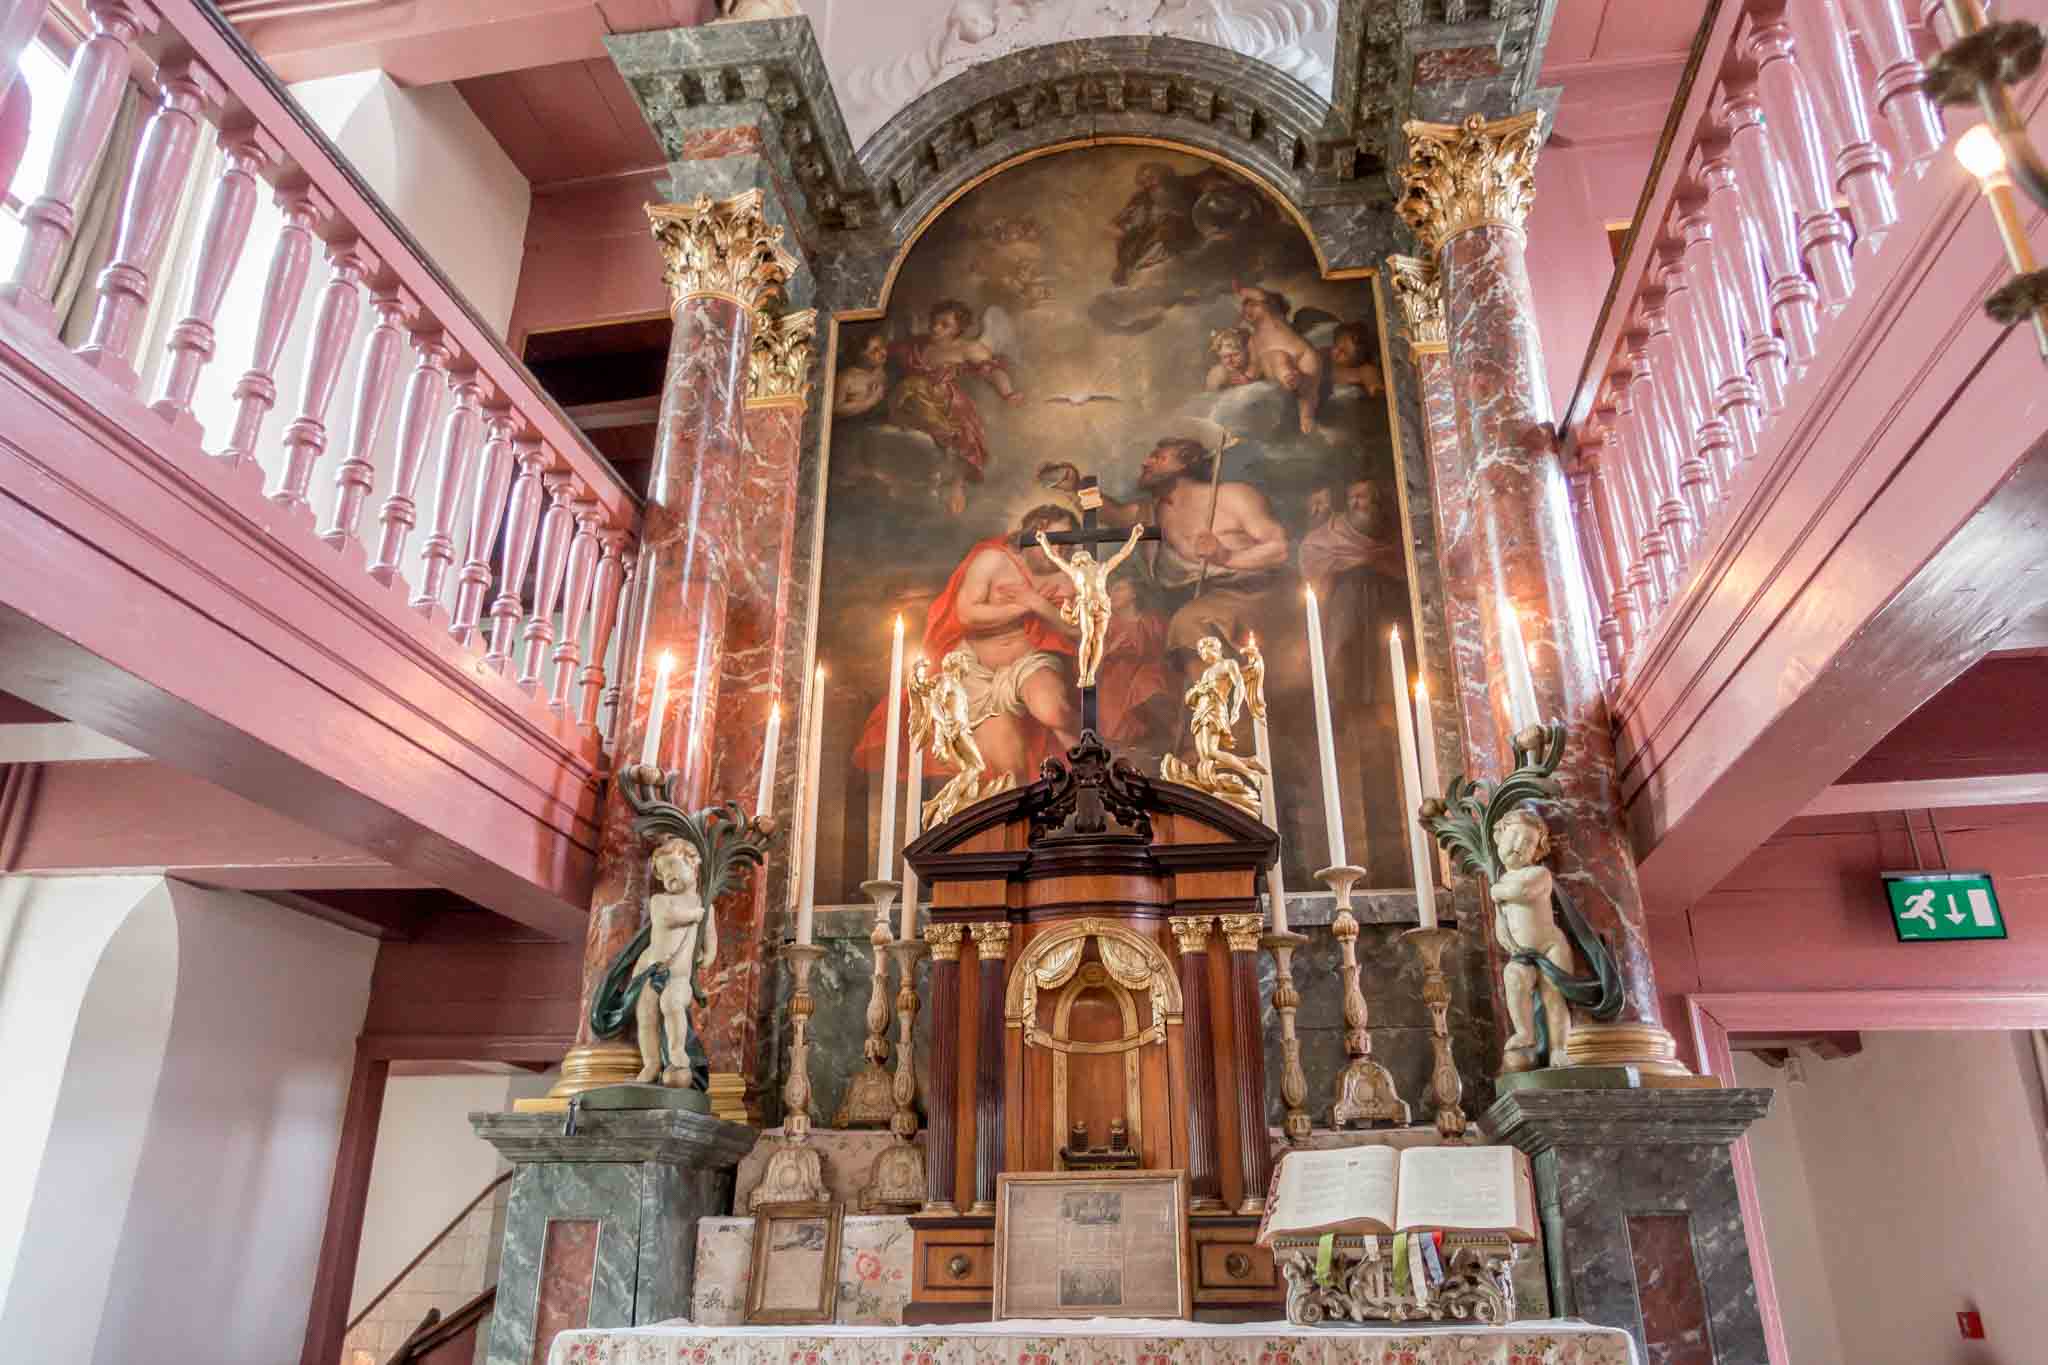 Altar and religious painting in a church sanctuary.